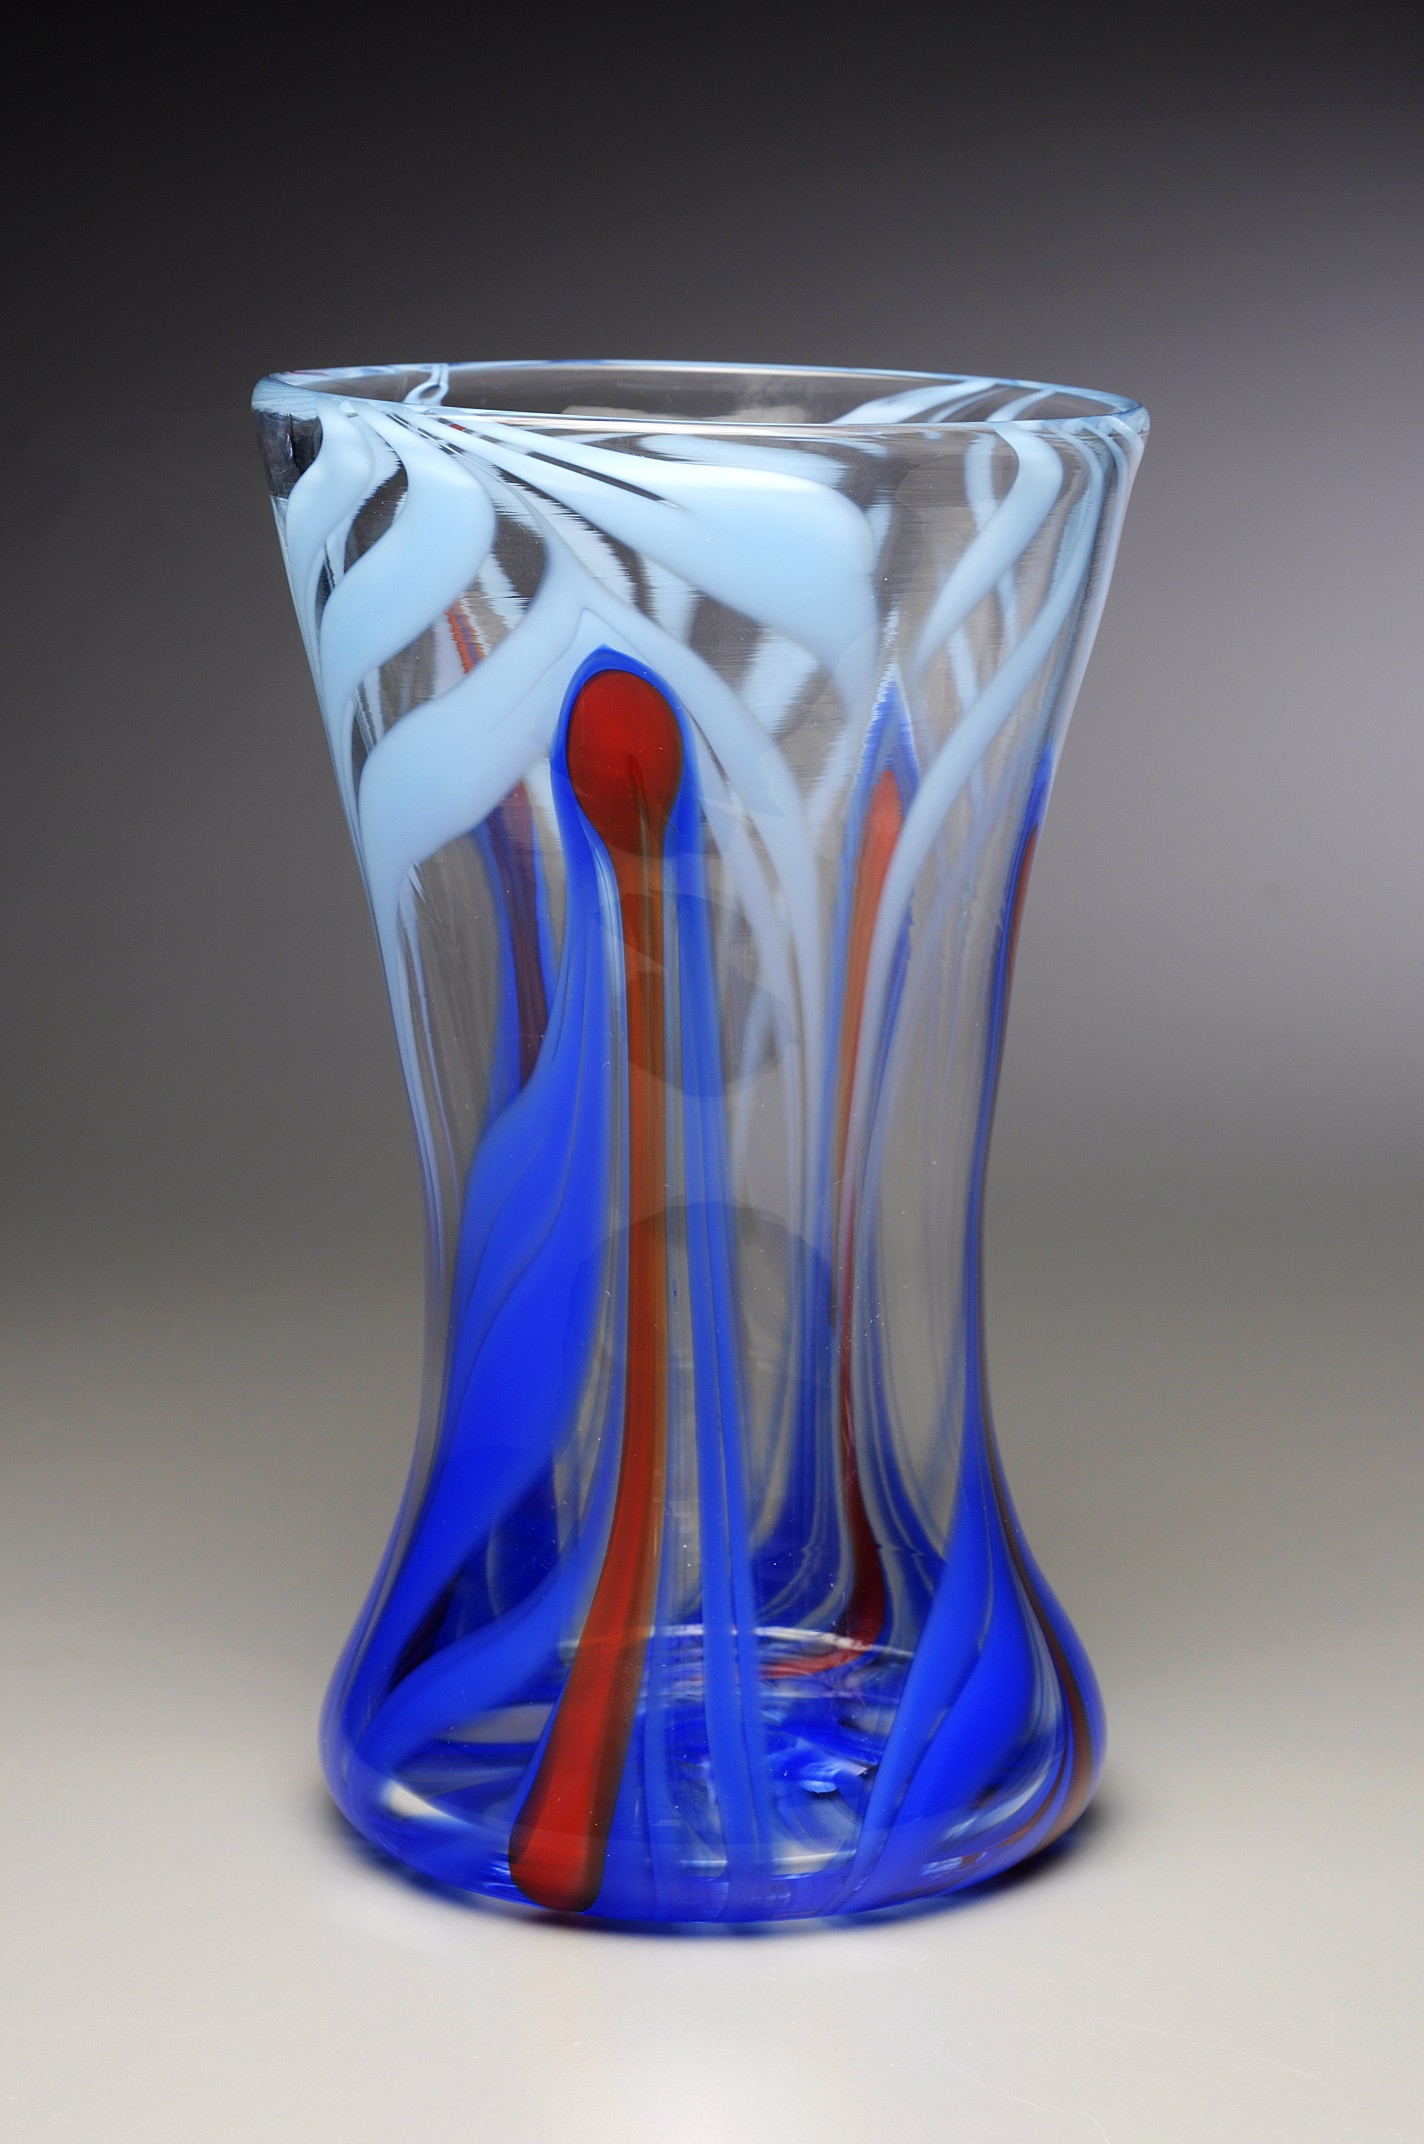 3x5 cylinder vase of cac submissions creative arts workshop with regard to flared vase glass 7″ x 7″